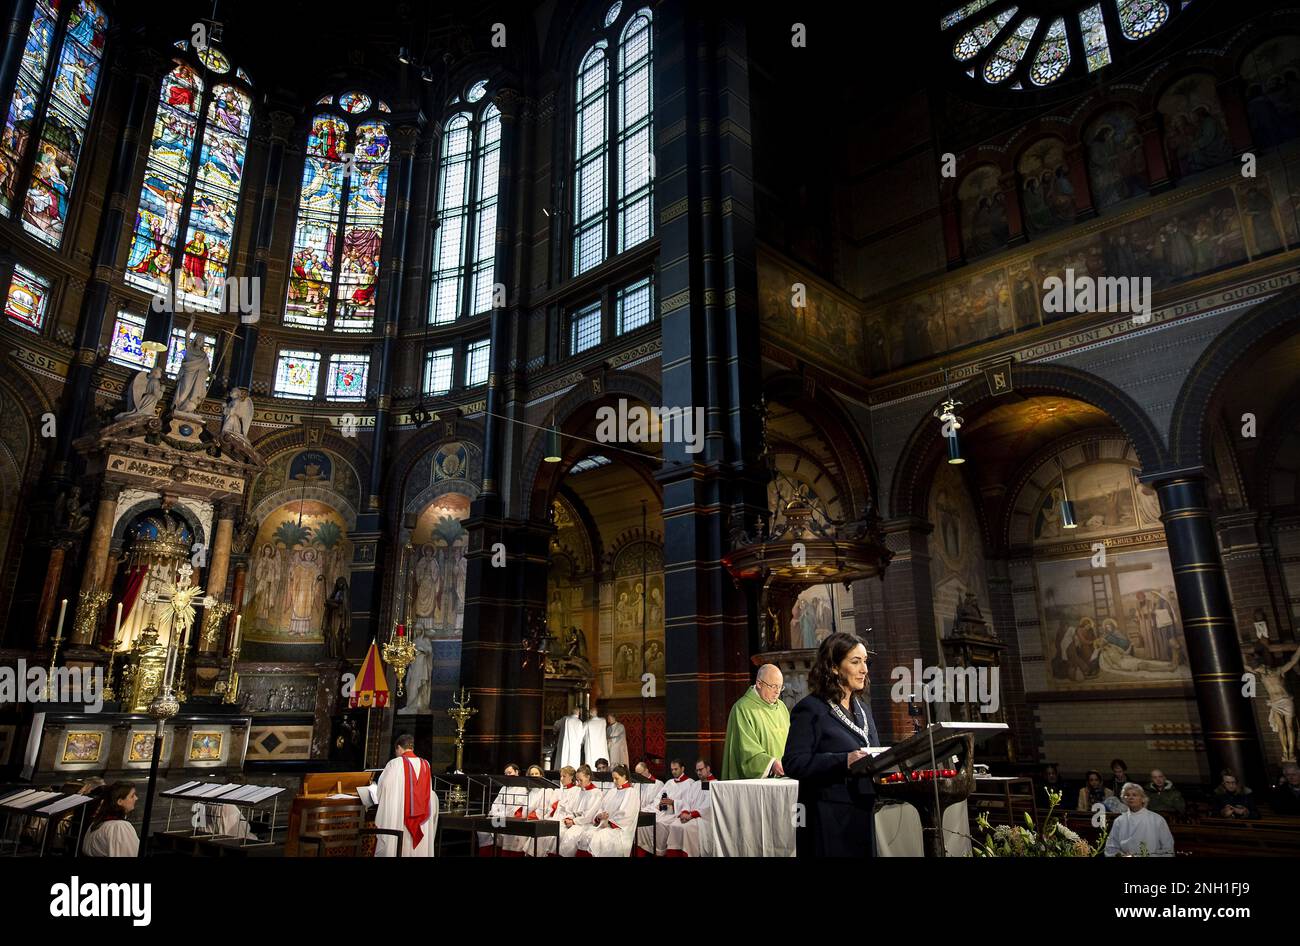 AMSTERDAM - The mayor of Amsterdam, Femke Halsema, speaks during mass in the Nicholas Basilica, which is dedicated to the victims of the earthquakes in Turkey and Syria. During the celebration, attention is also paid to the war in Ukraine, which has been going on for a year. ANP KOEN VAN WEEL netherlands out - belgium out Stock Photo